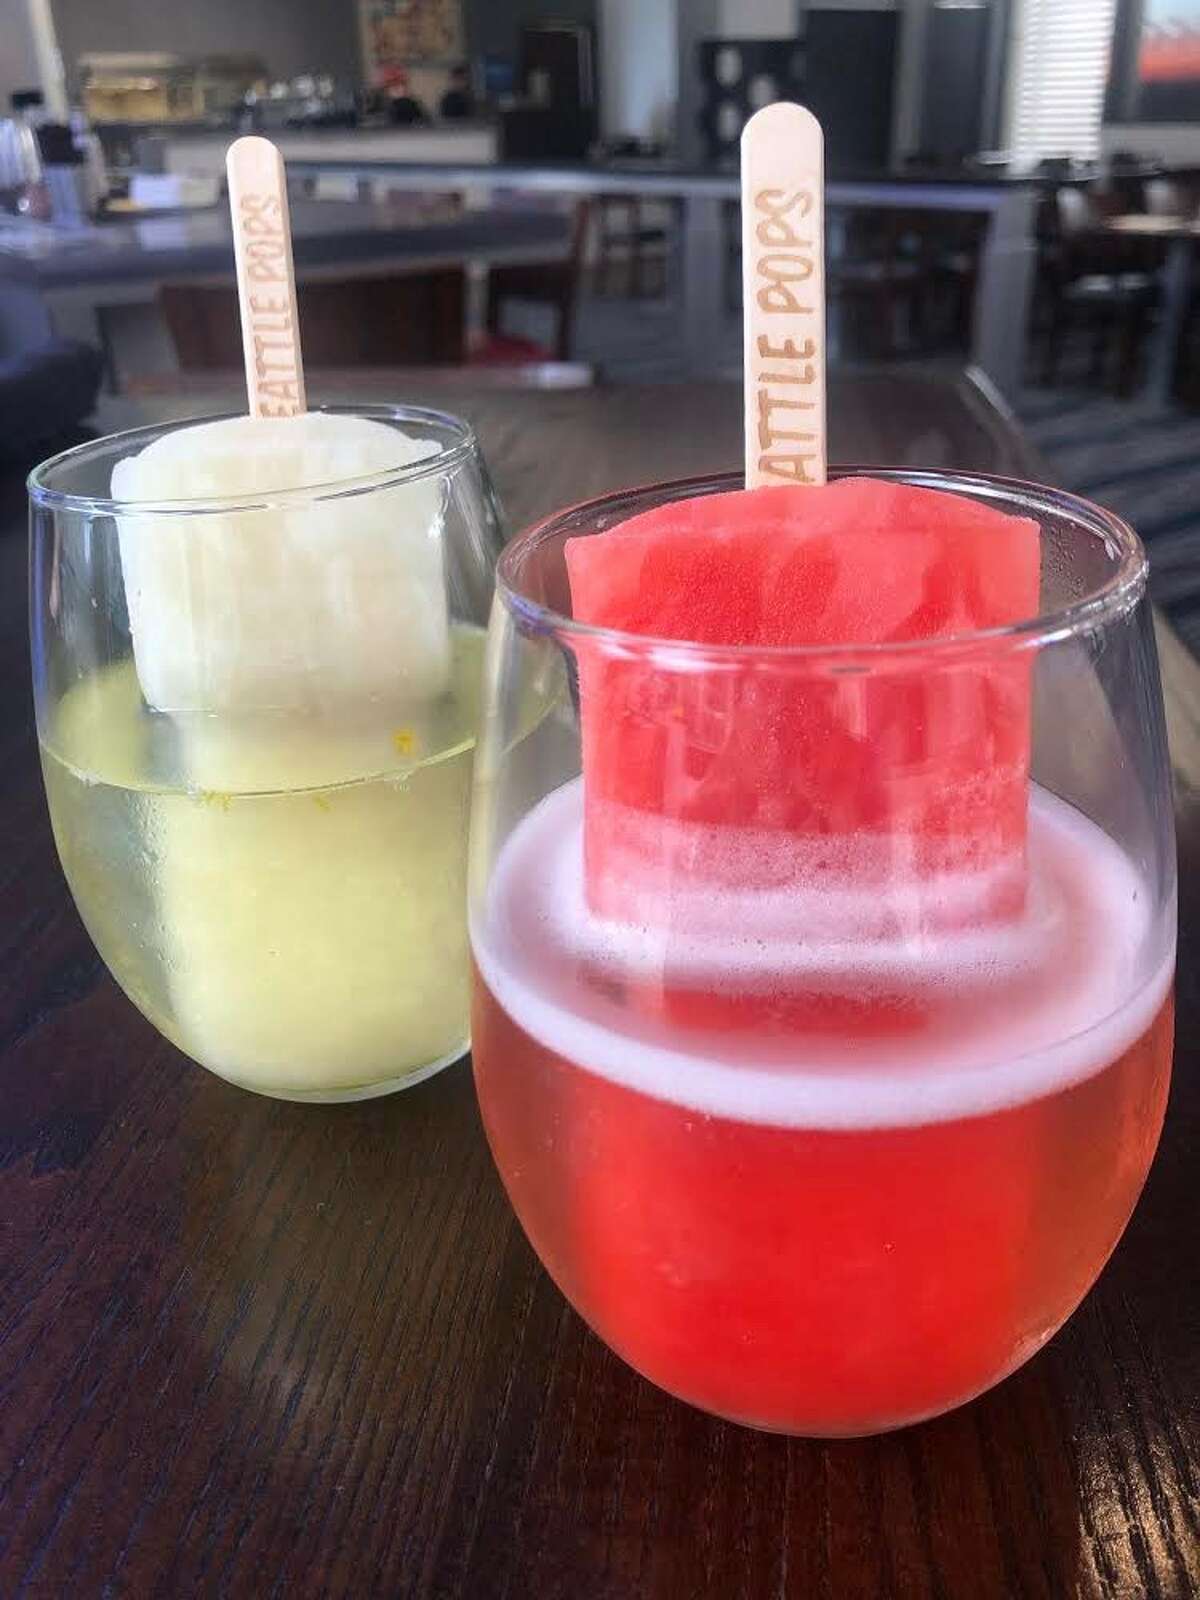 Atop the Motif hotel in downtown Seattle, we welcome these red, white, and boozy prosecco pops with open arms. With a rooftop view to pair, Frolik is stepping up its cocktail game alongside the original beloved Seattle Pops, plopped into a glass of bubbly.